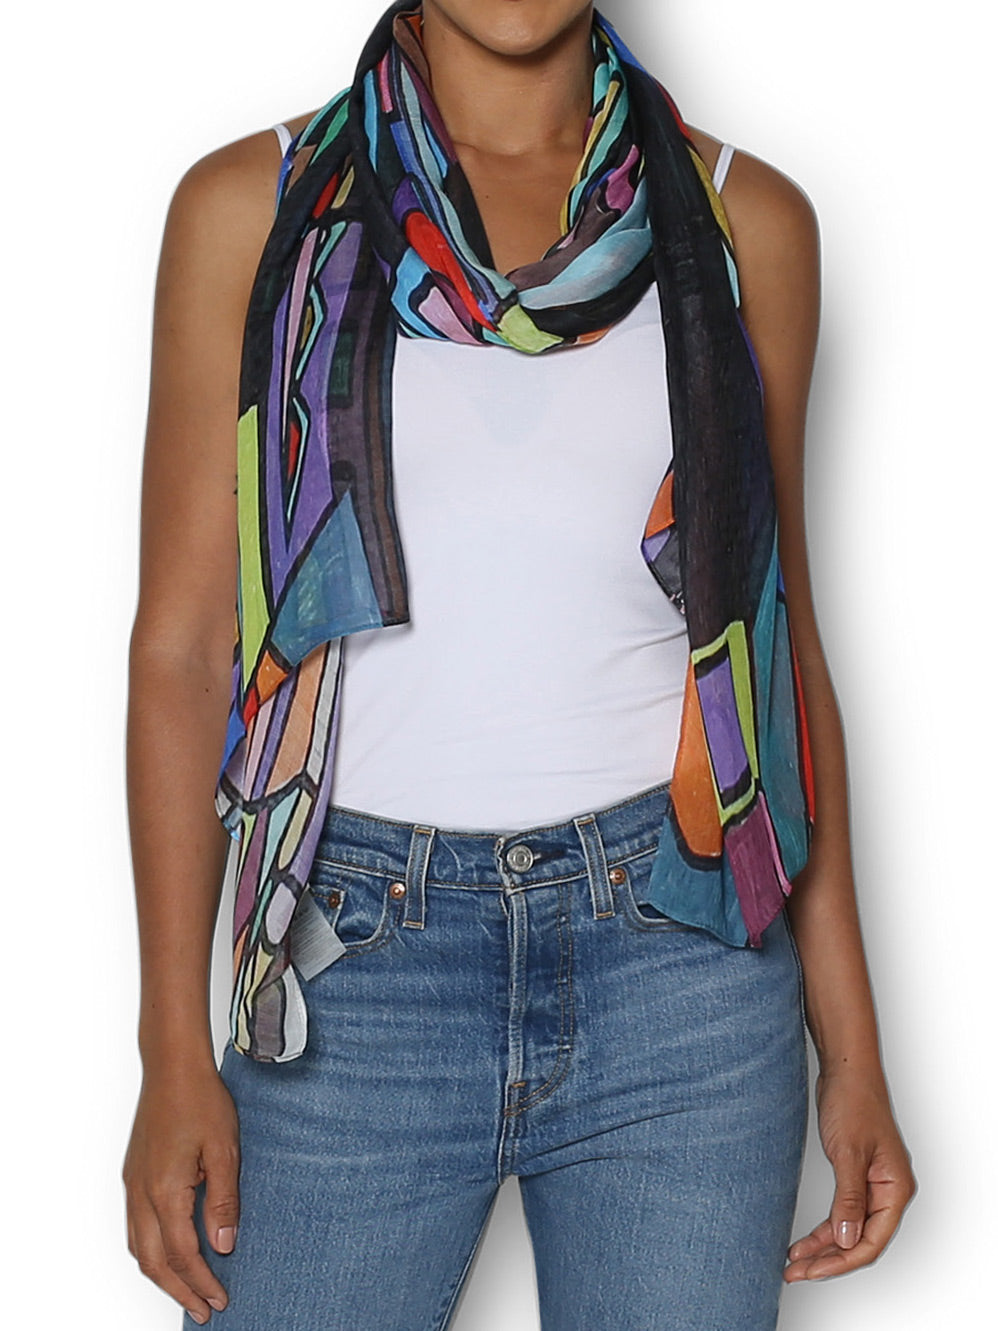 THE ARTISTS LABEL DIVERSITY SCARF